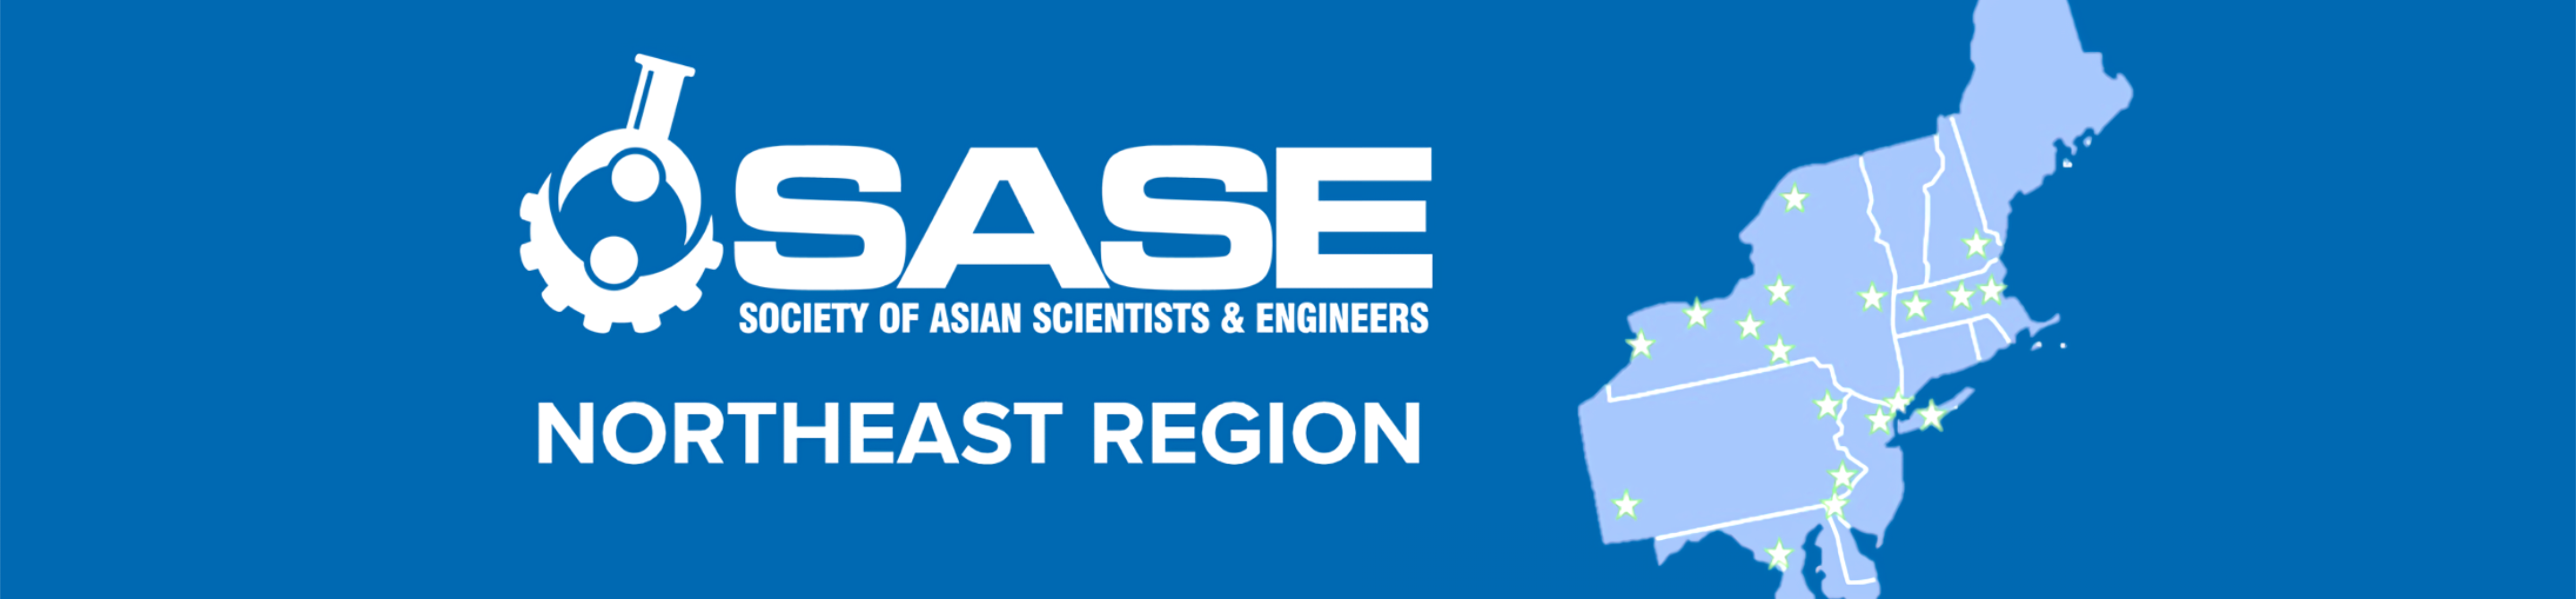 SASE Northeast Regional Conference - Rutgers Society of Asian